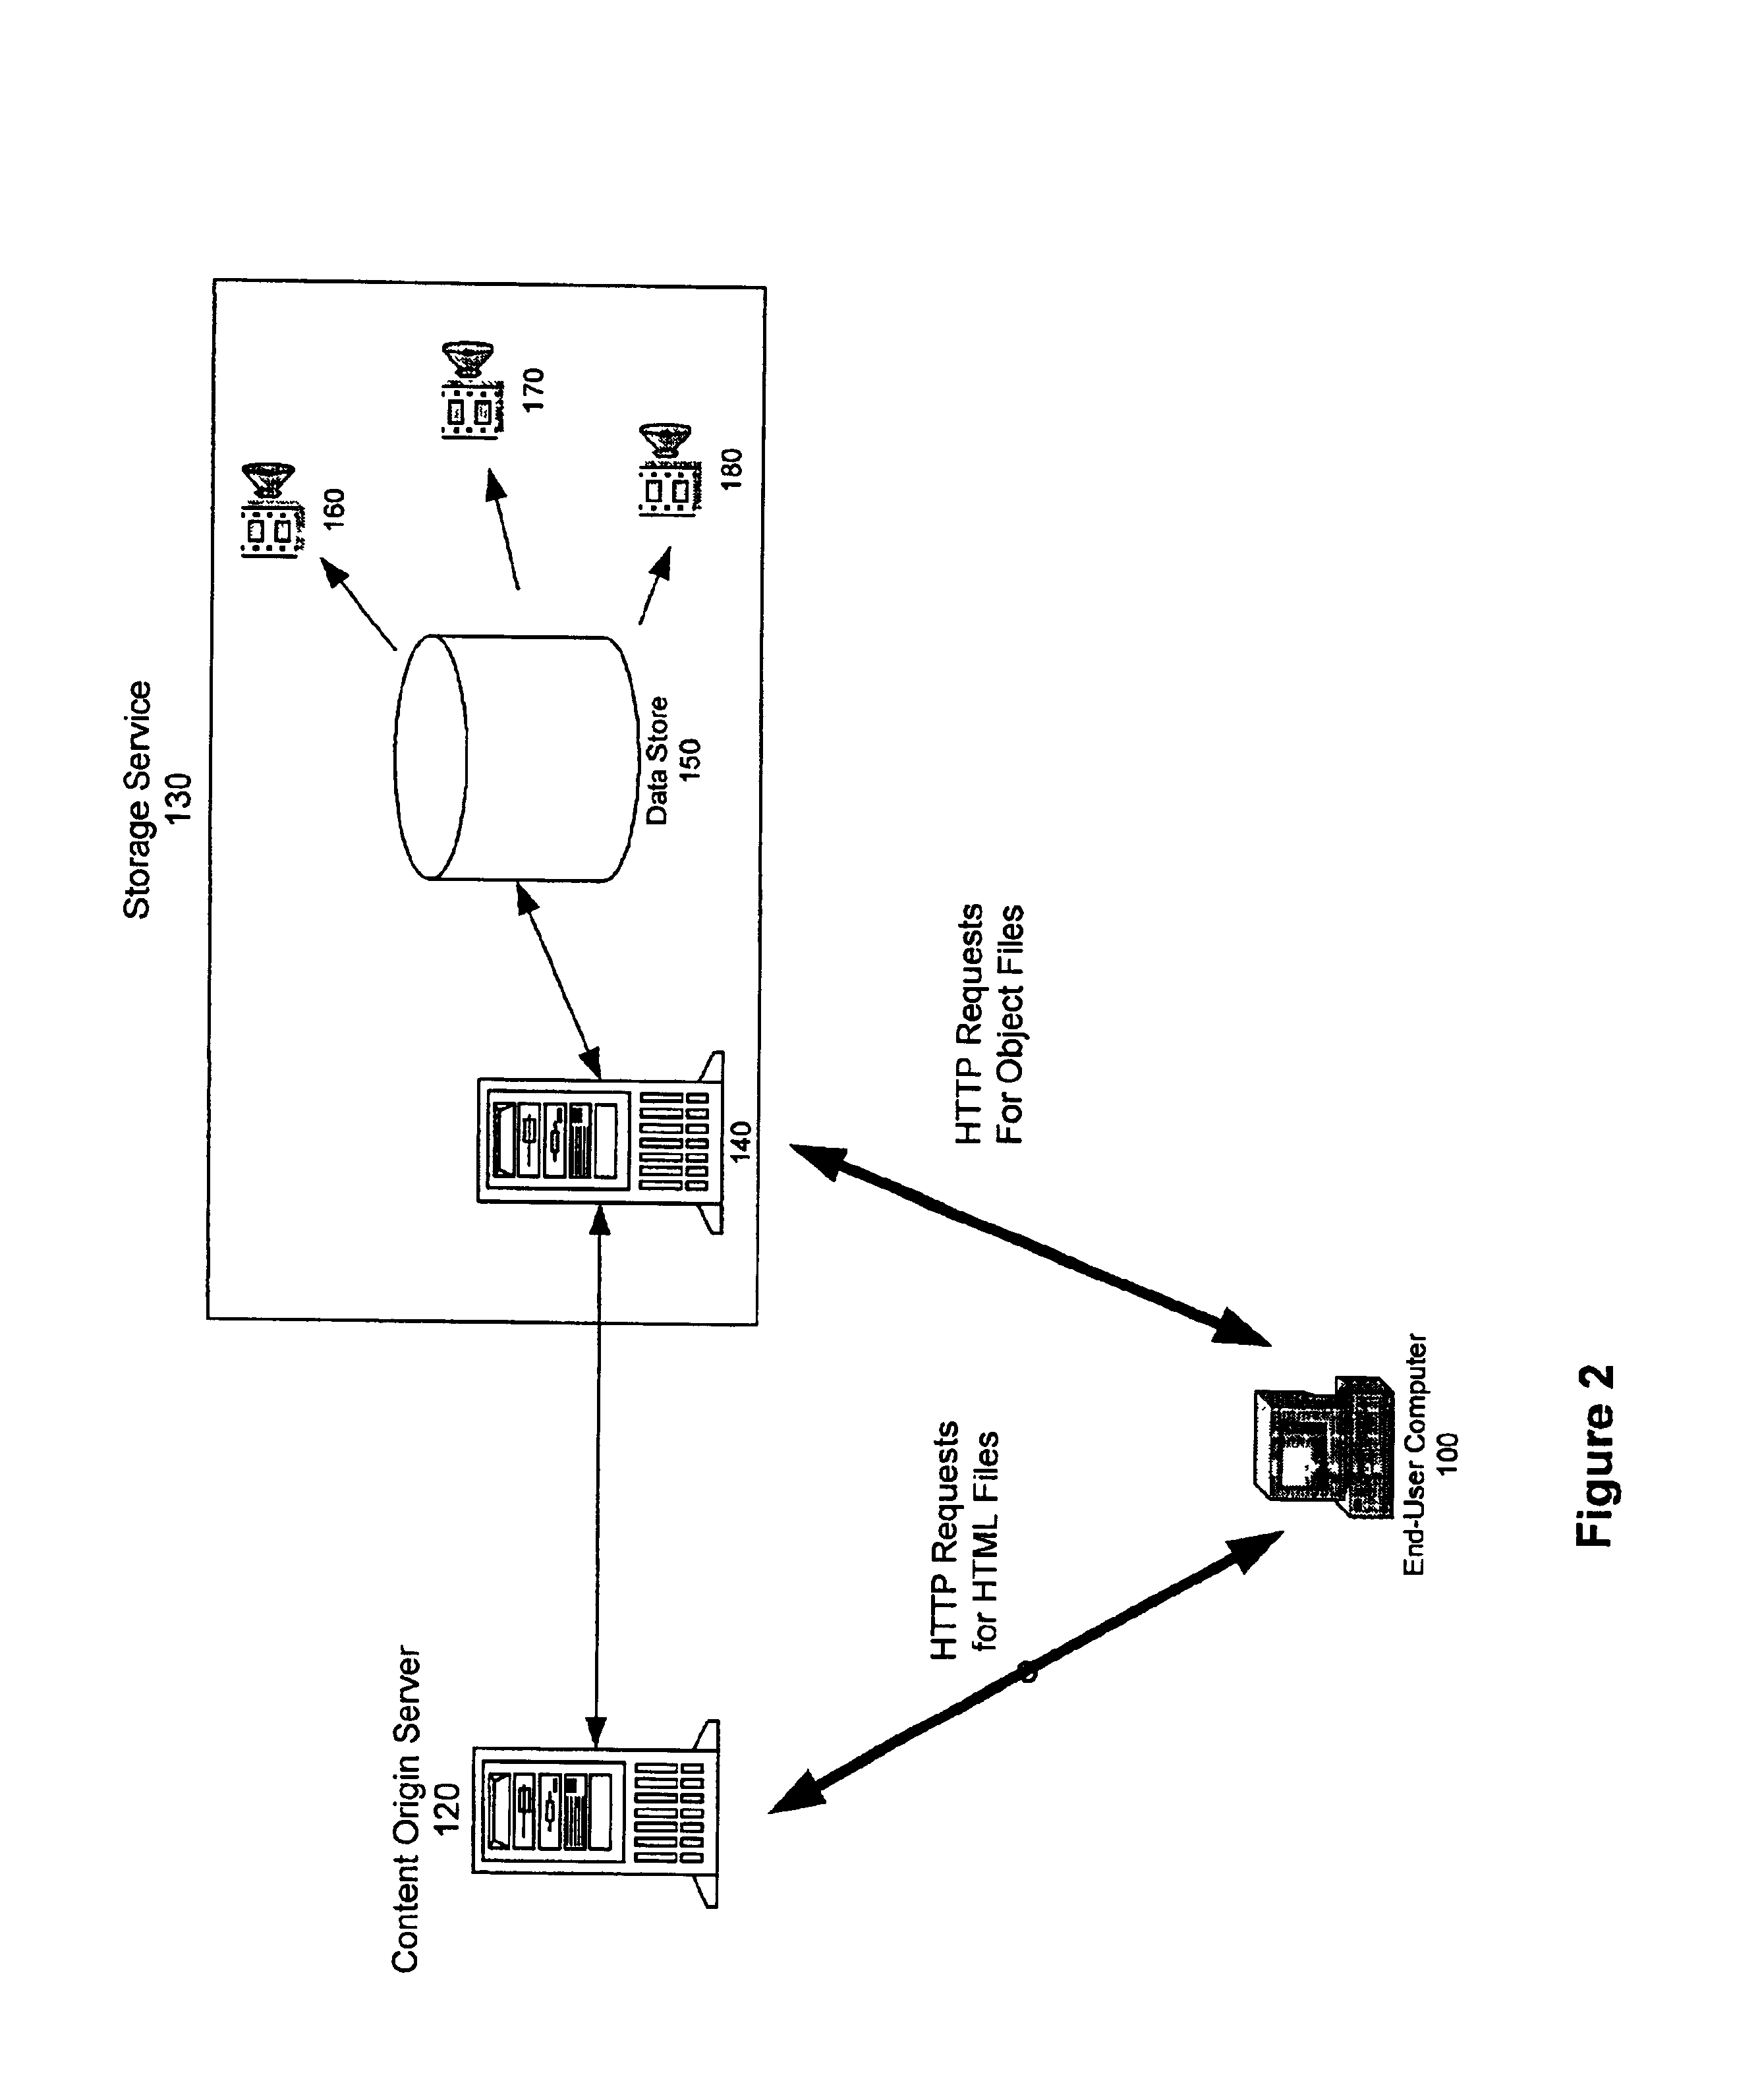 Method and apparatus for accessing remote storage in a distributed storage cluster architecture